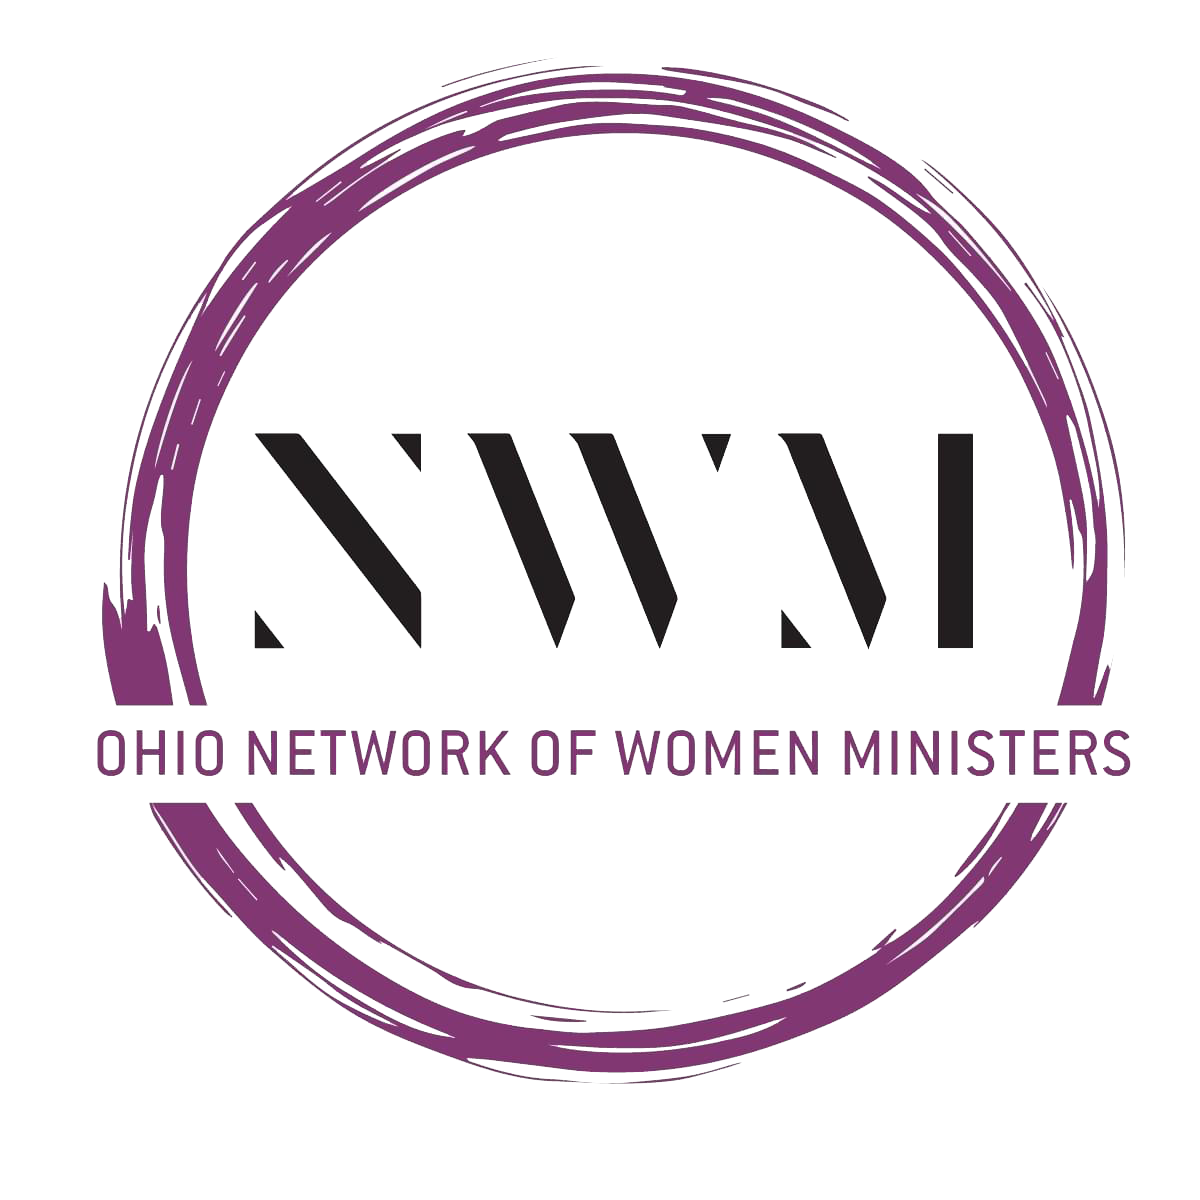 Ohio Network of Women Ministers